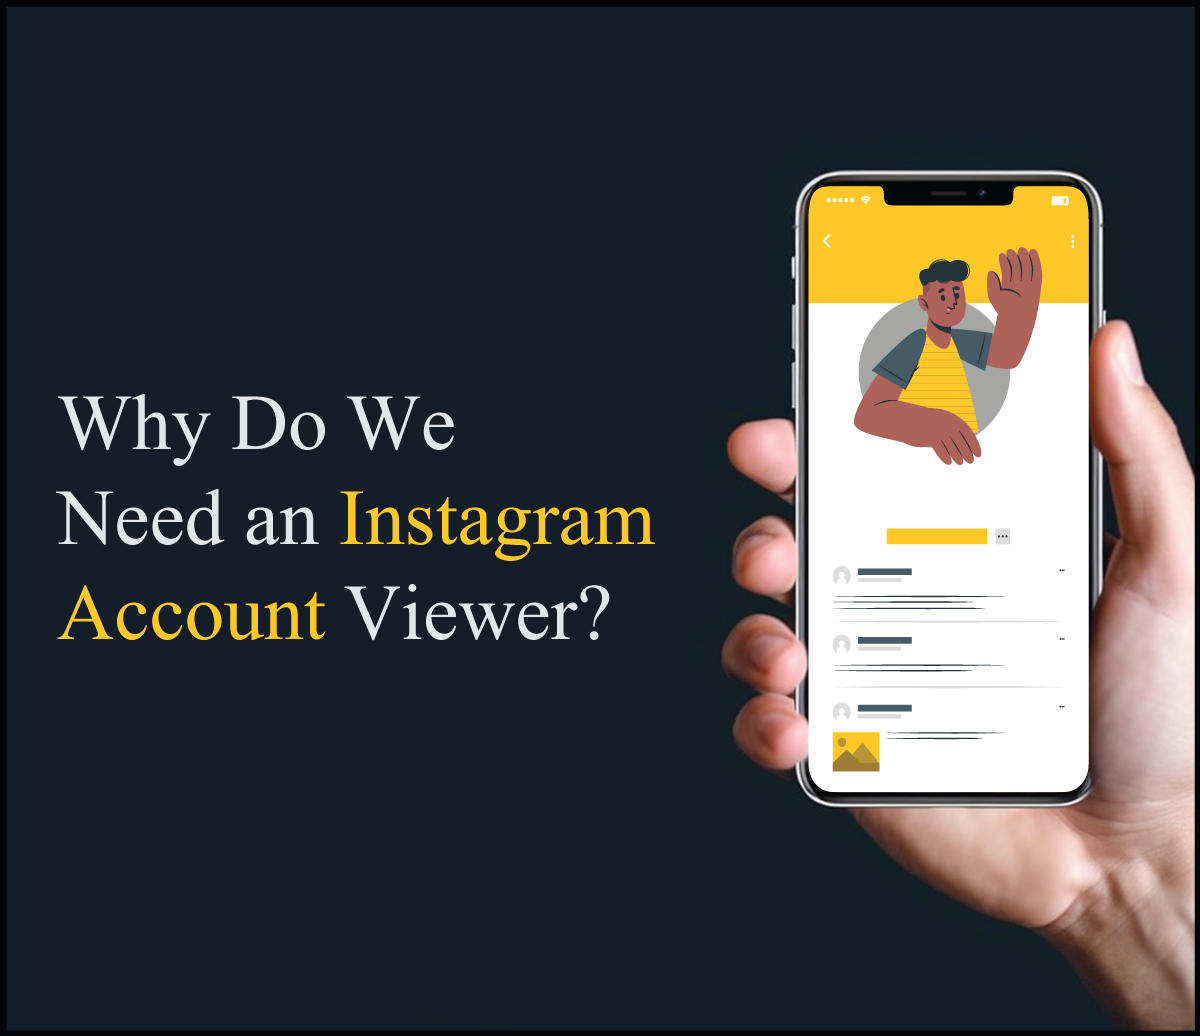 Why Do We Need an Instagram Account Viewer?